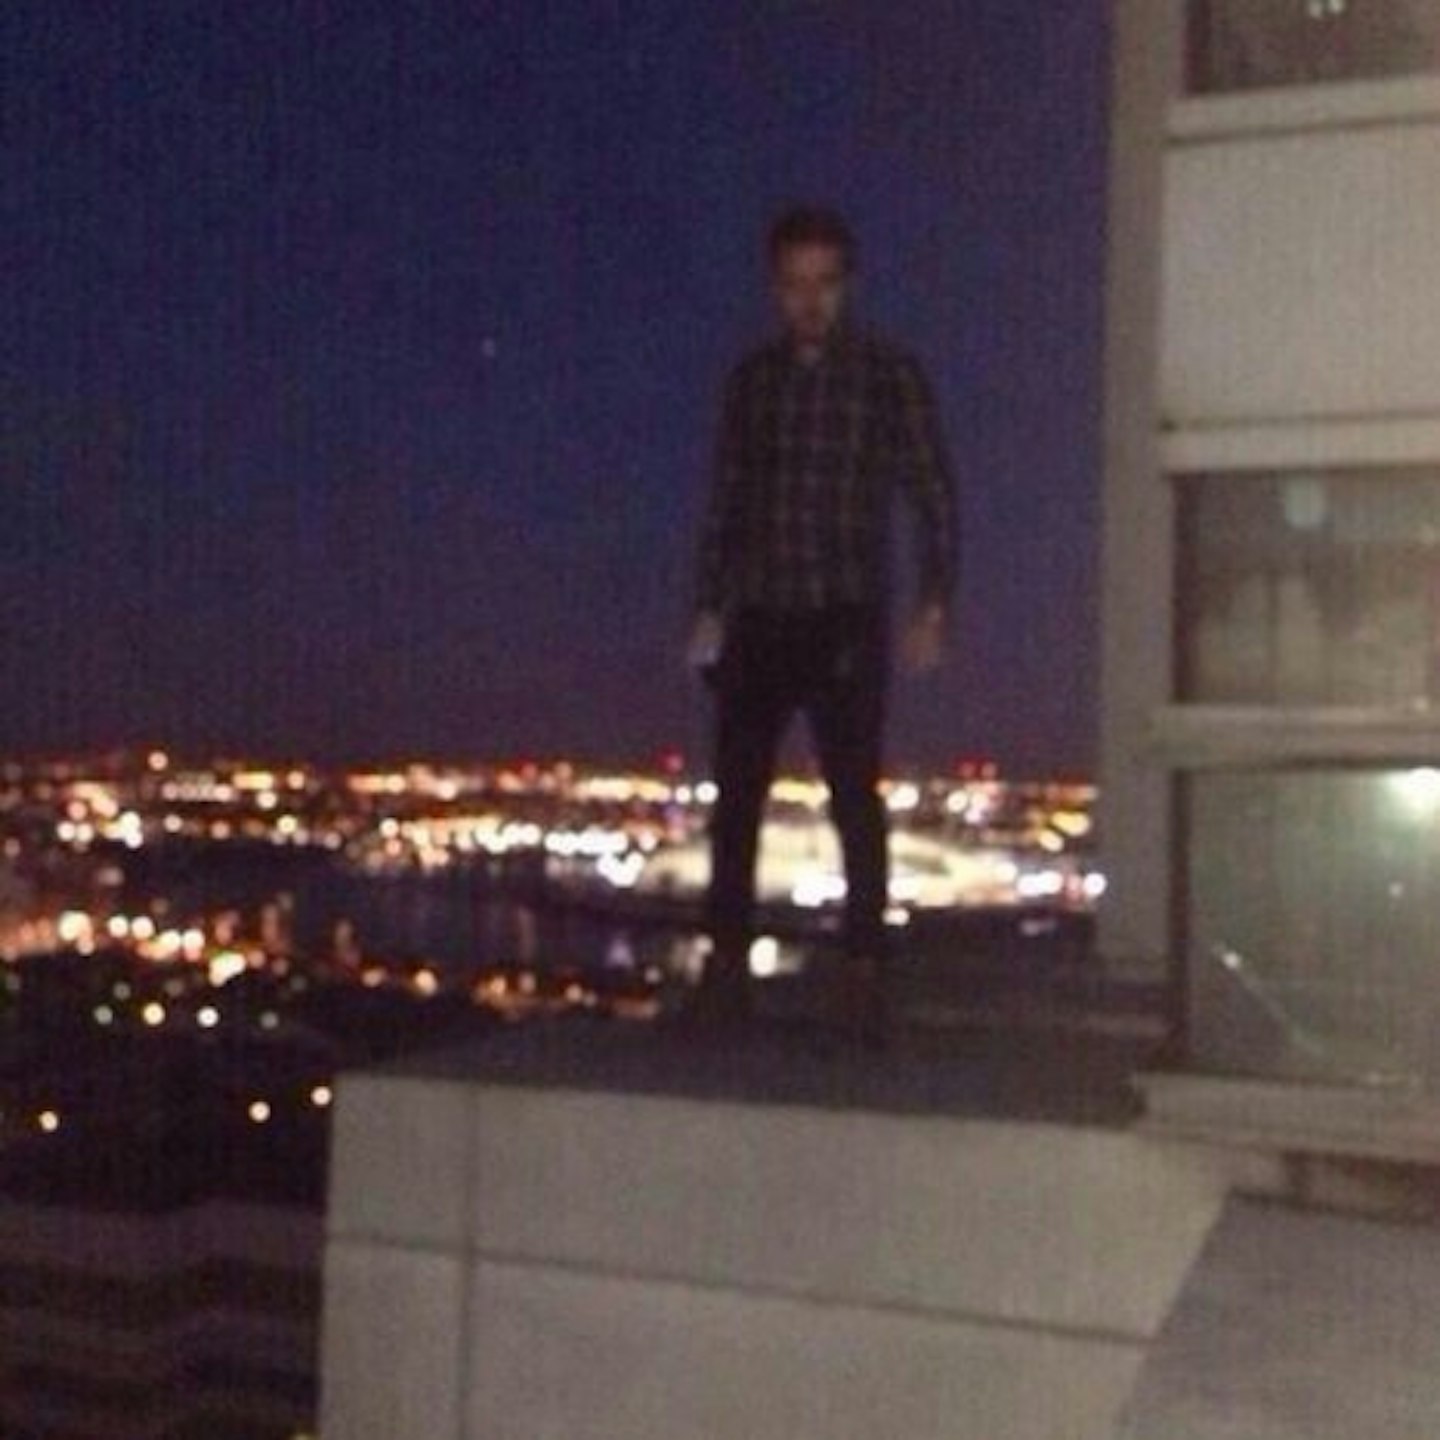 Liam poses 34 floors up, shocking fans